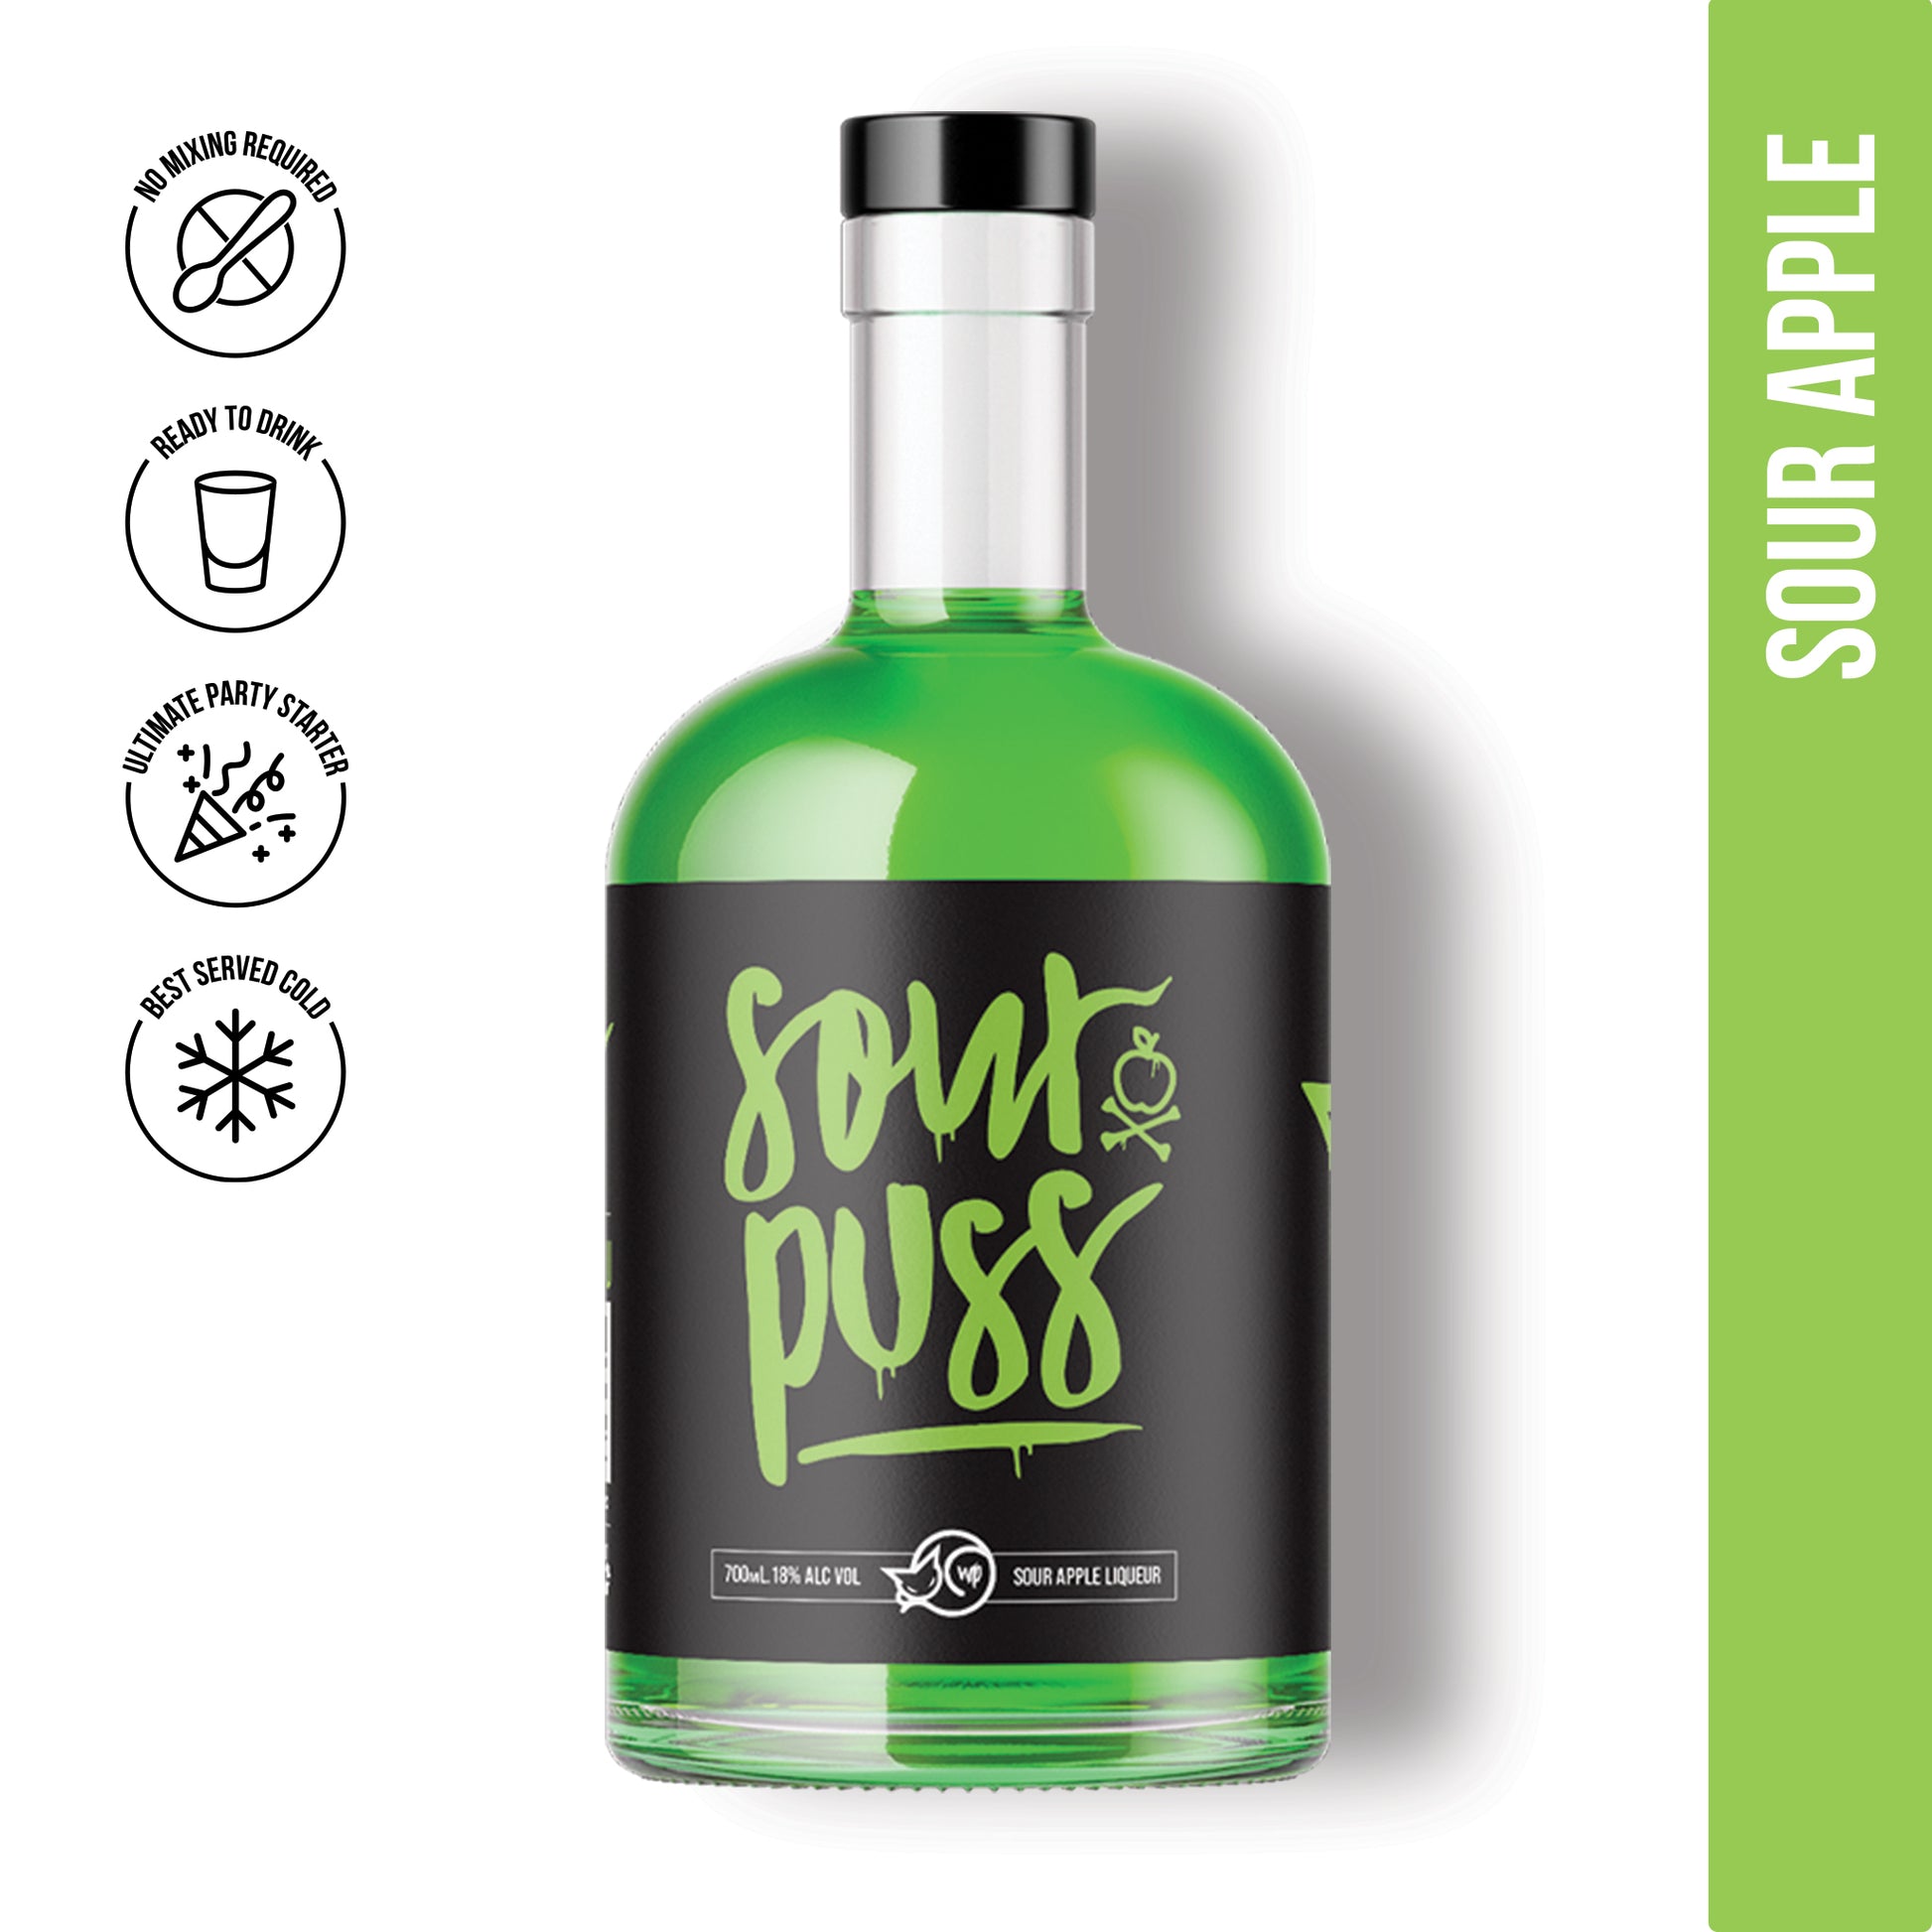 Sour Puss Ultimate Mega Pack - 80Proof 